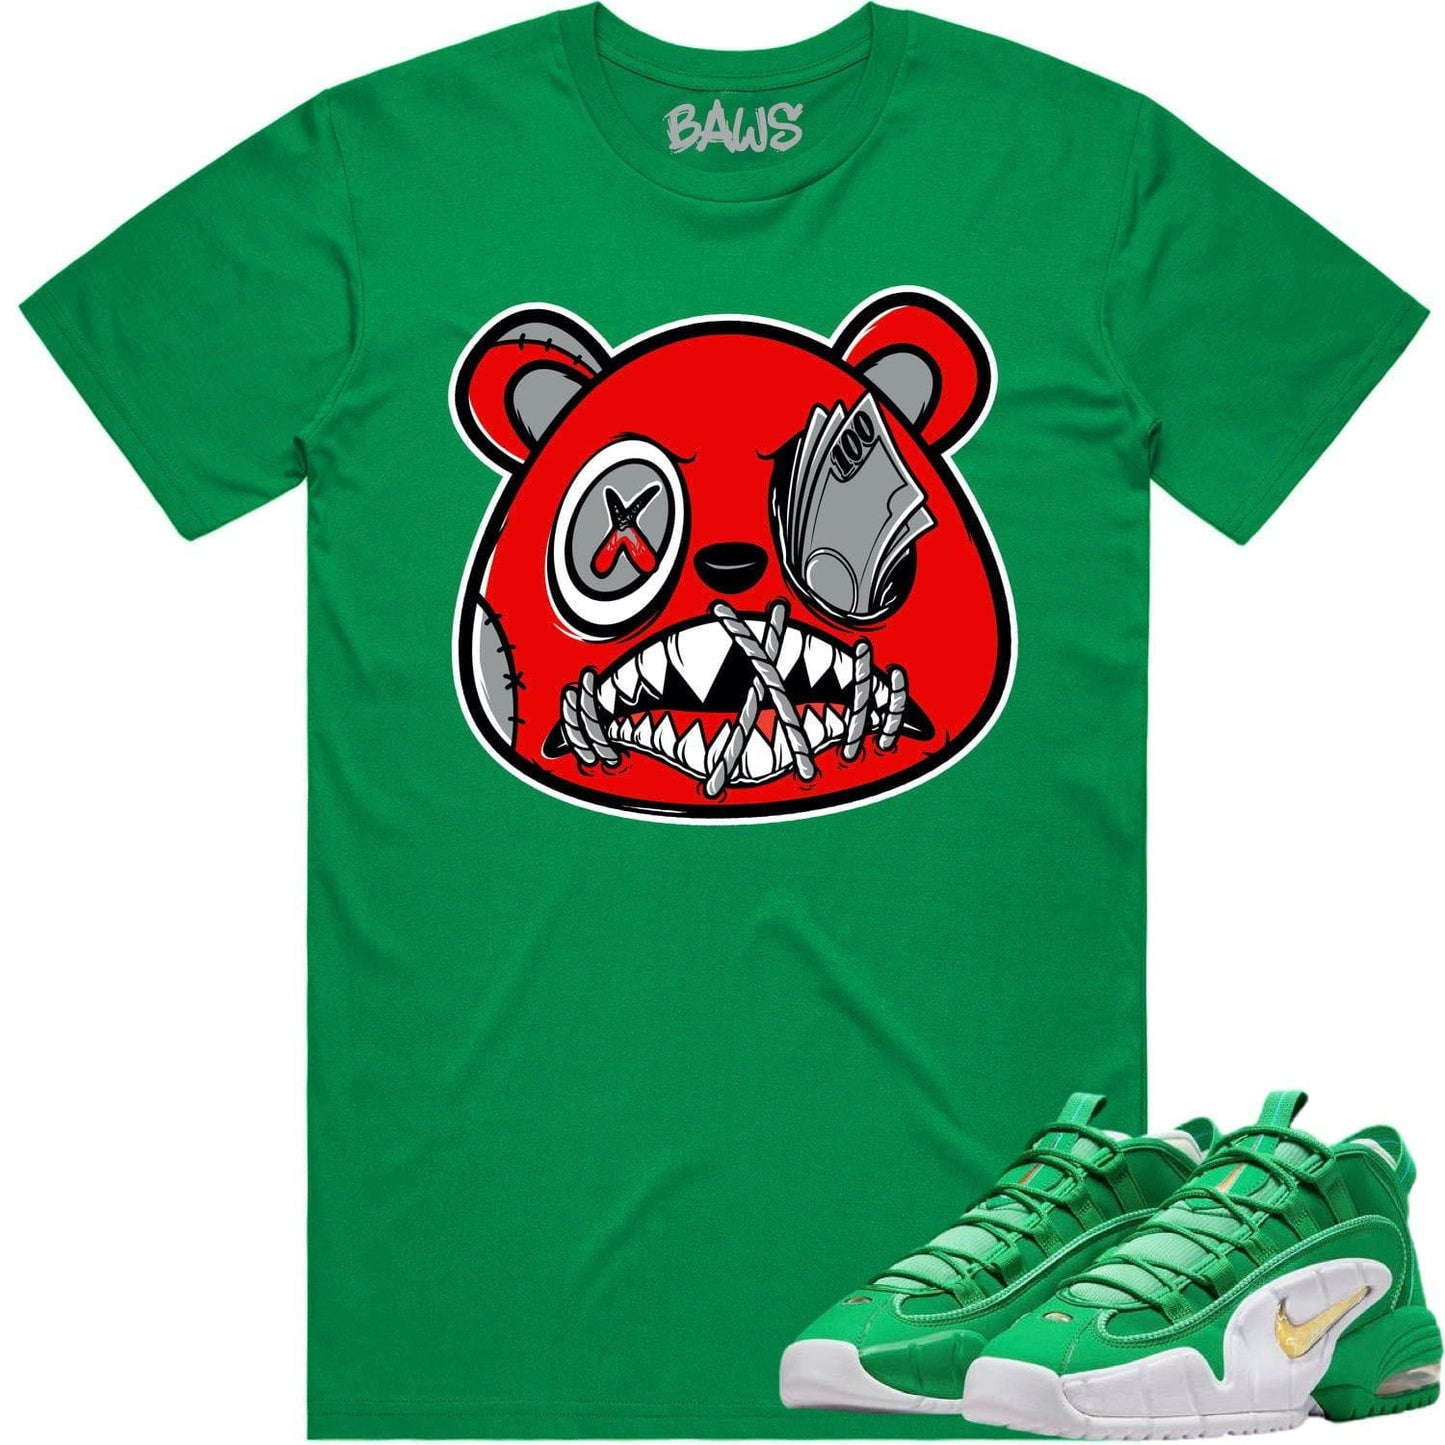 Penny 1 Stadium Green 1s Shirt - Sneaker Tees - Angry Money Talks Baws